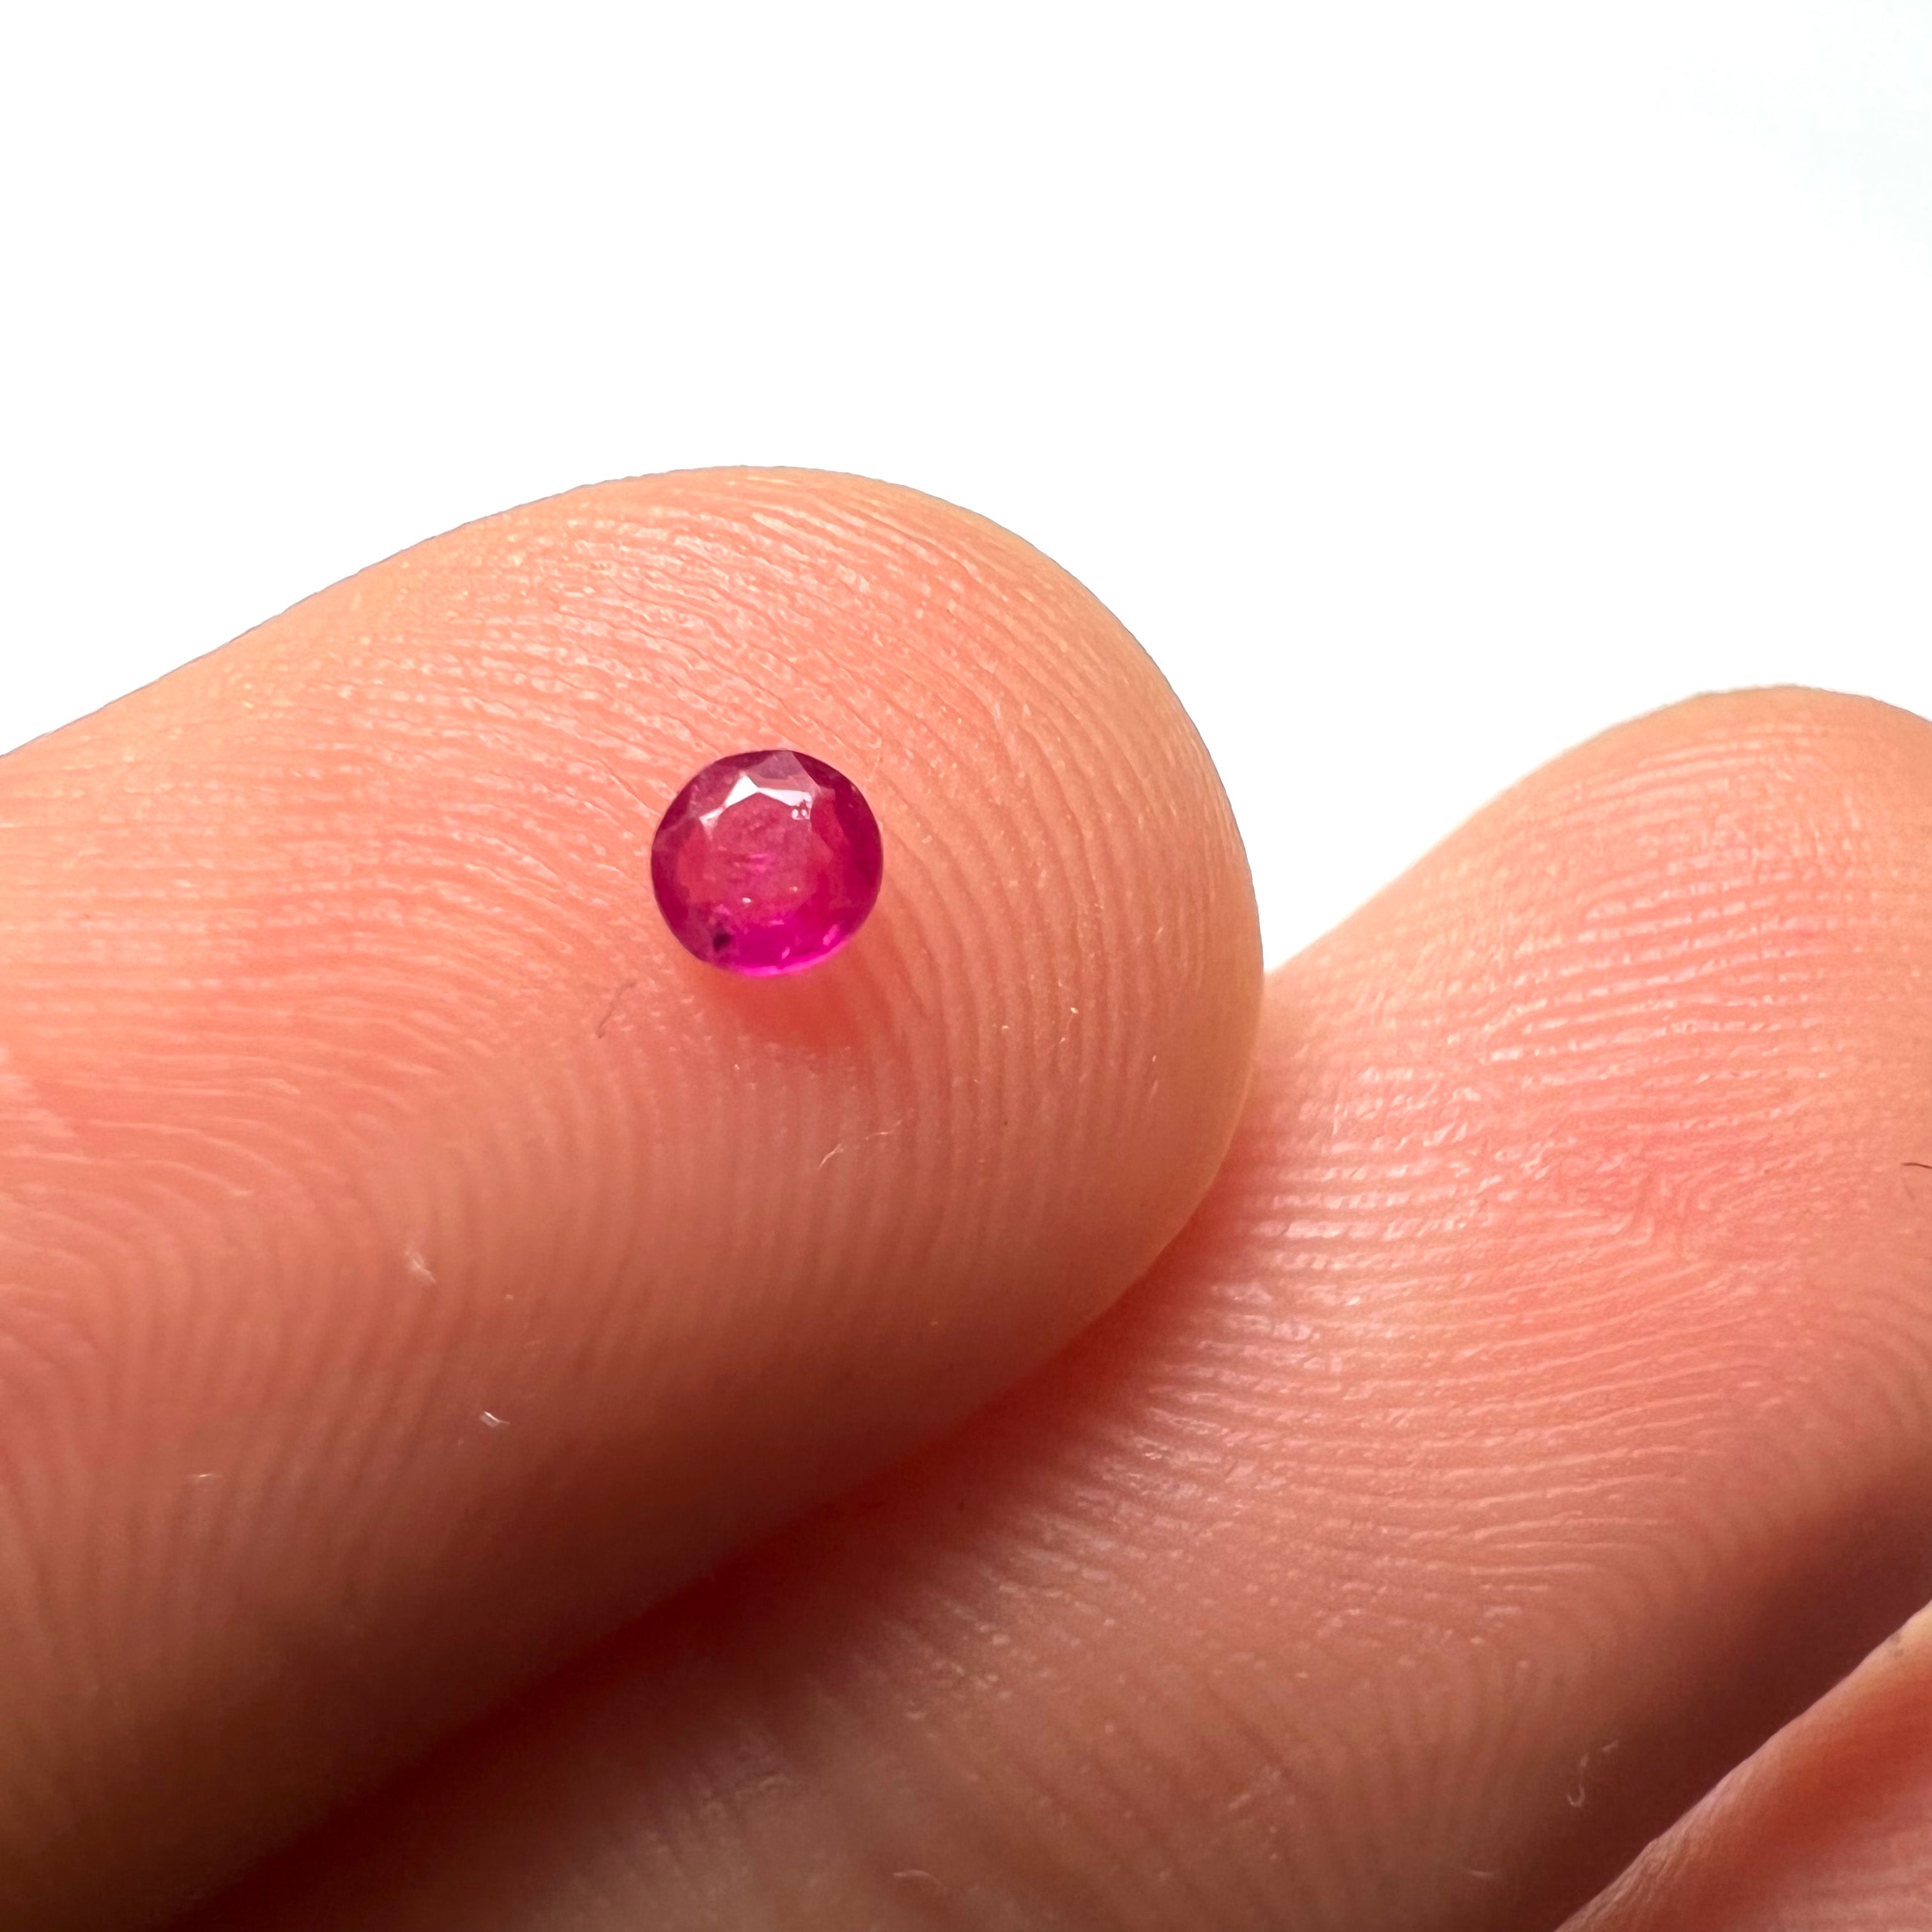 .08CT Loose Natural Round Ruby 3x1mm Earth mined Gemstone